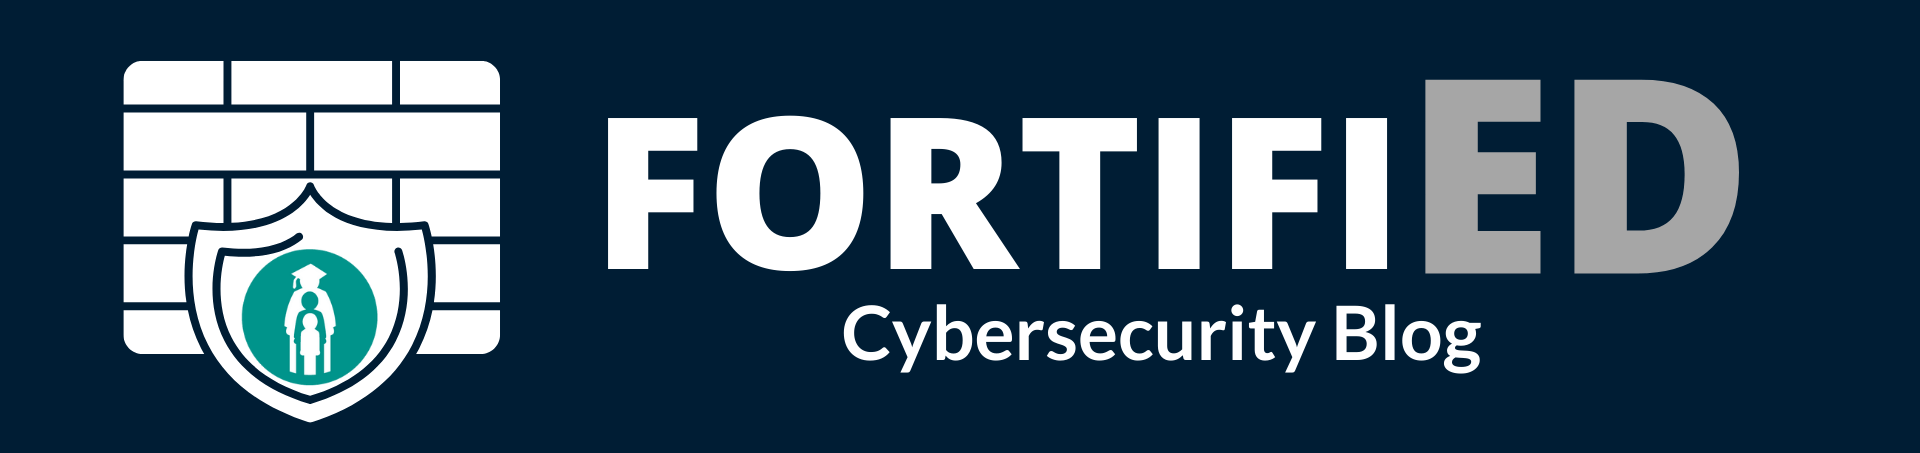 FortifiED Cybersecurity blog